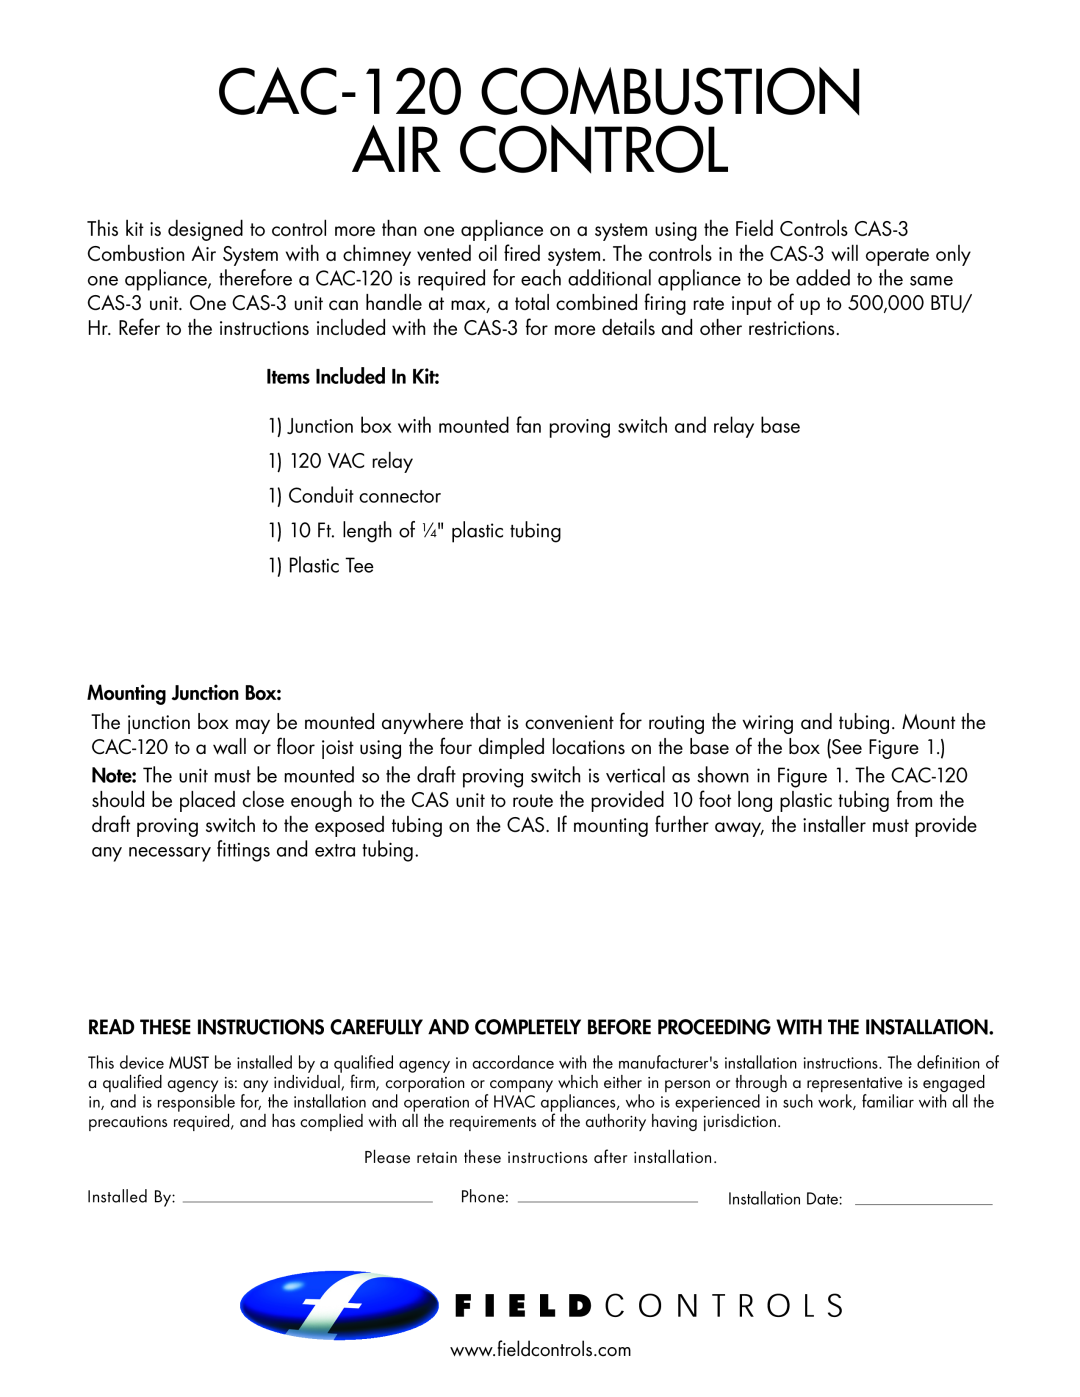 Field Controls installation instructions CAC-120COMBUSTION AIR CONTROL 